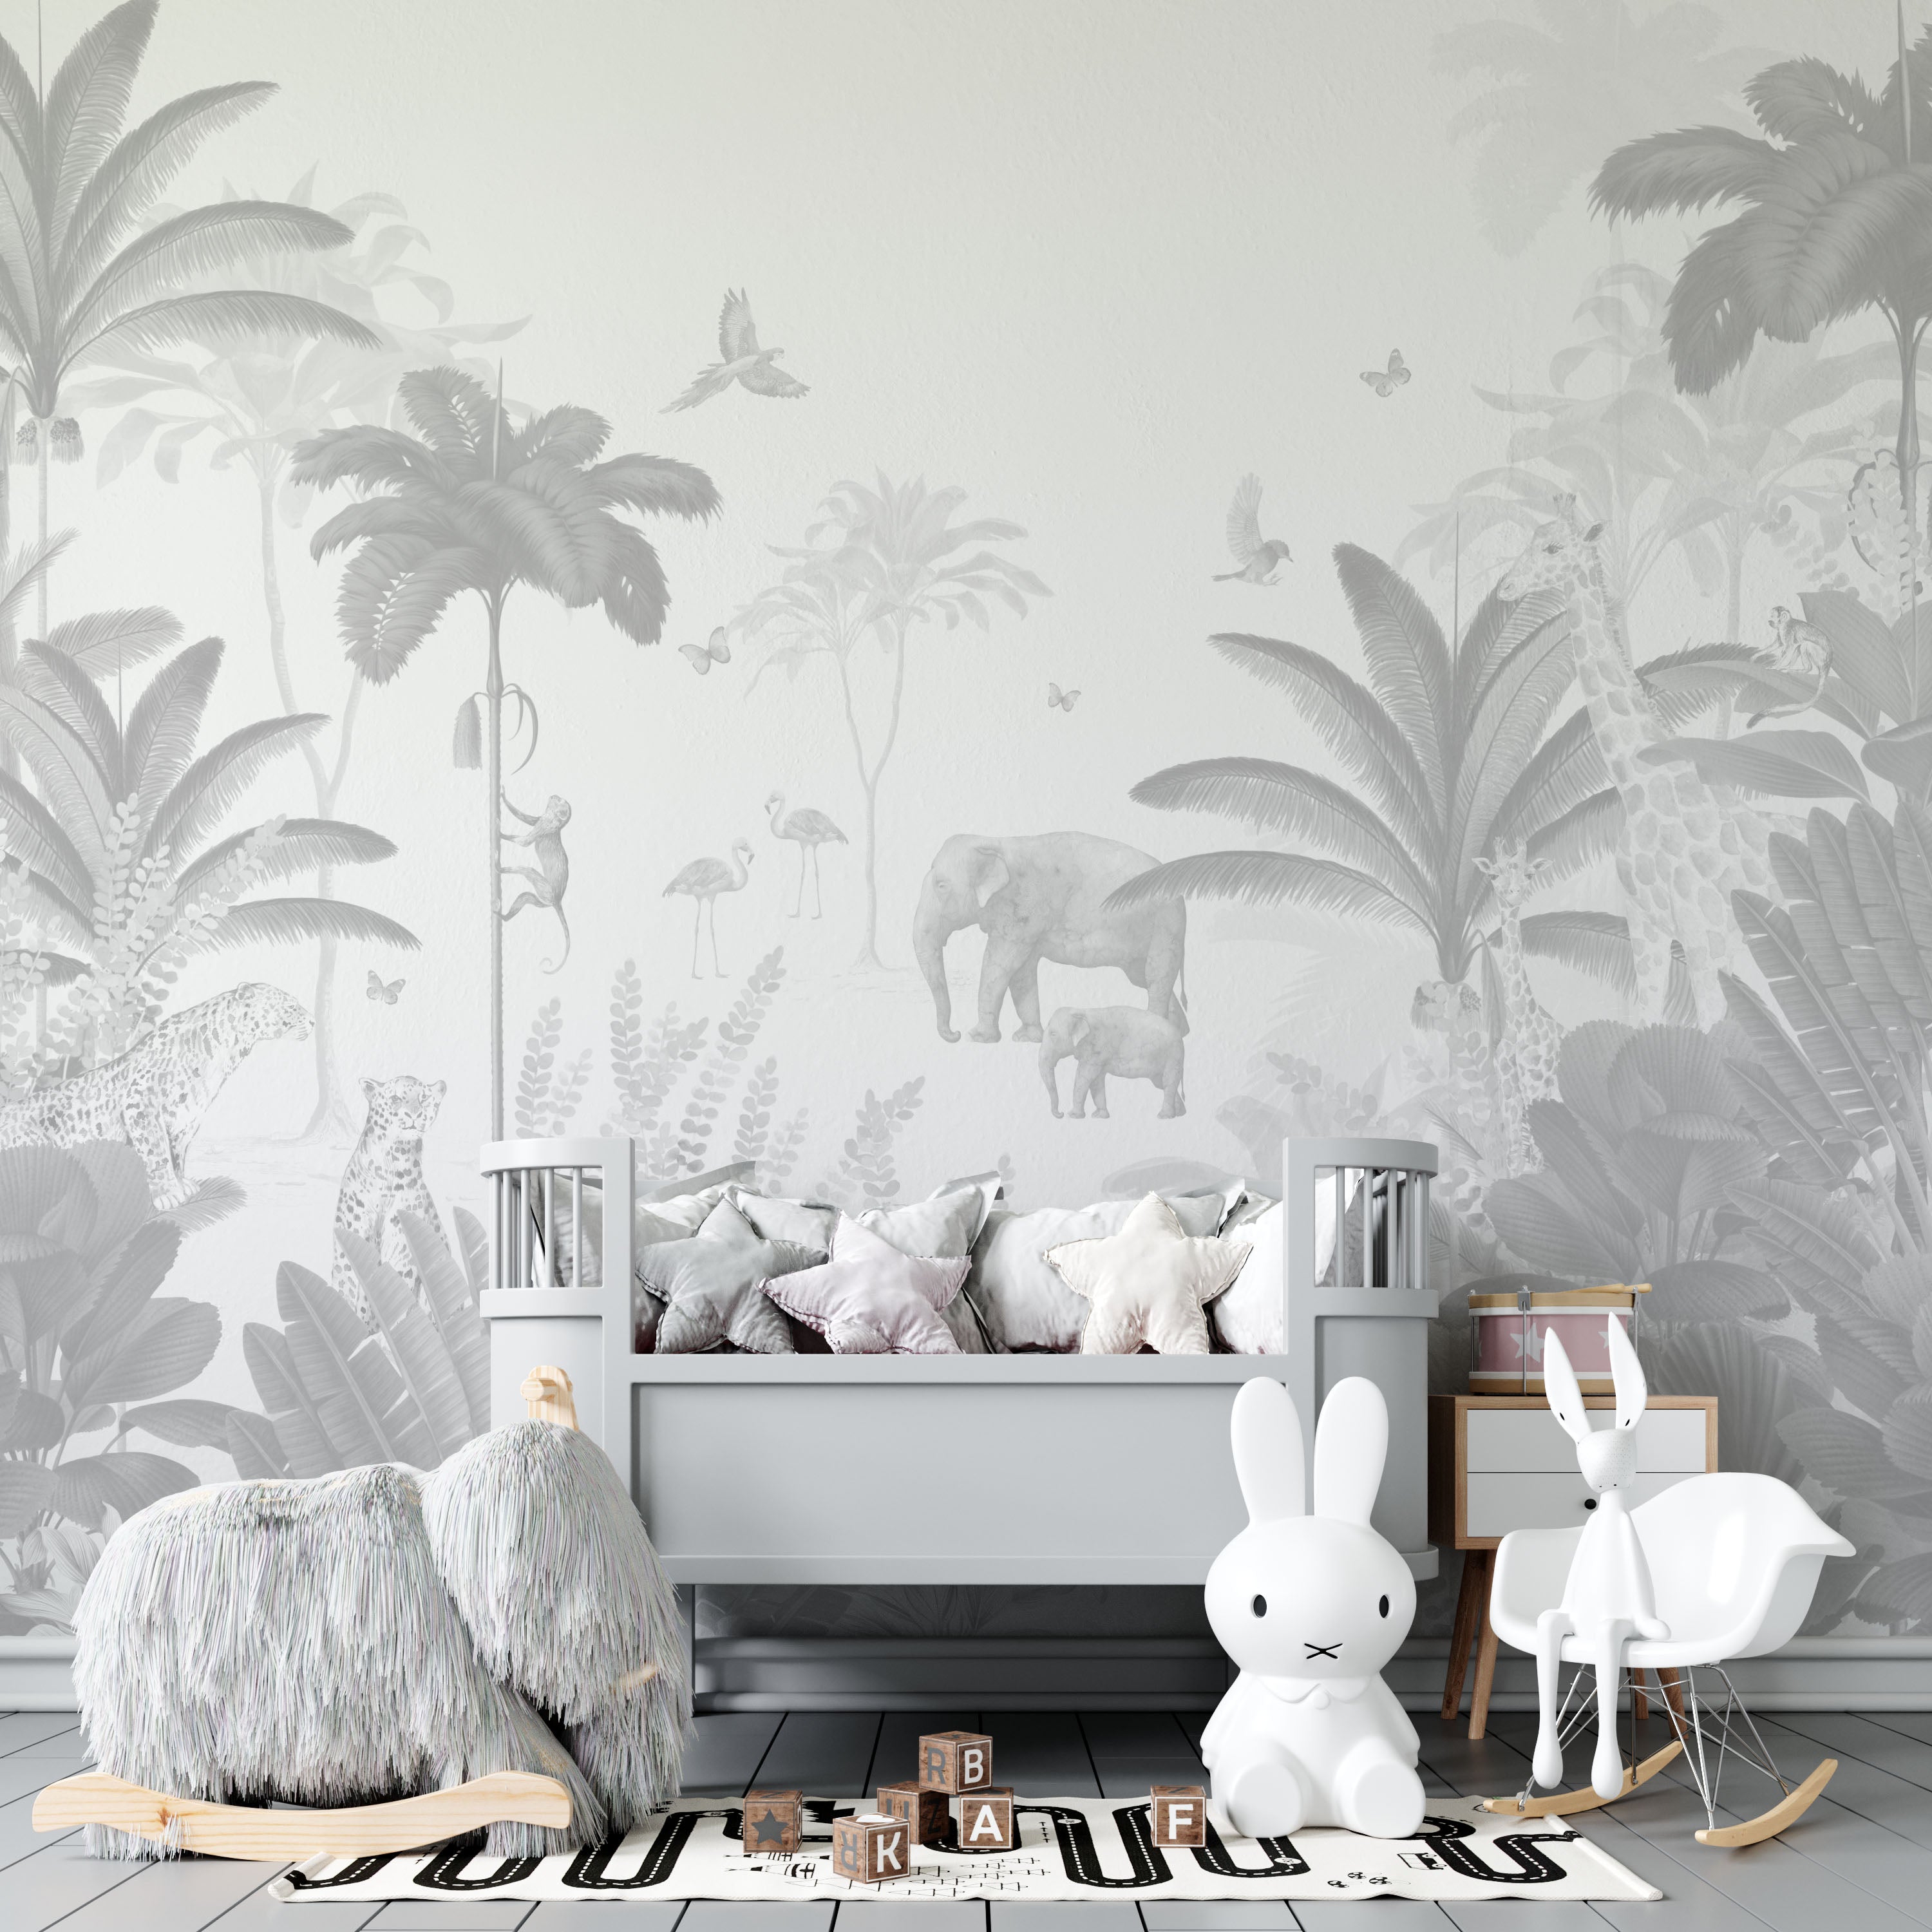 All Wallpaper Collection : Munks and Me - Nursery Wallpaper